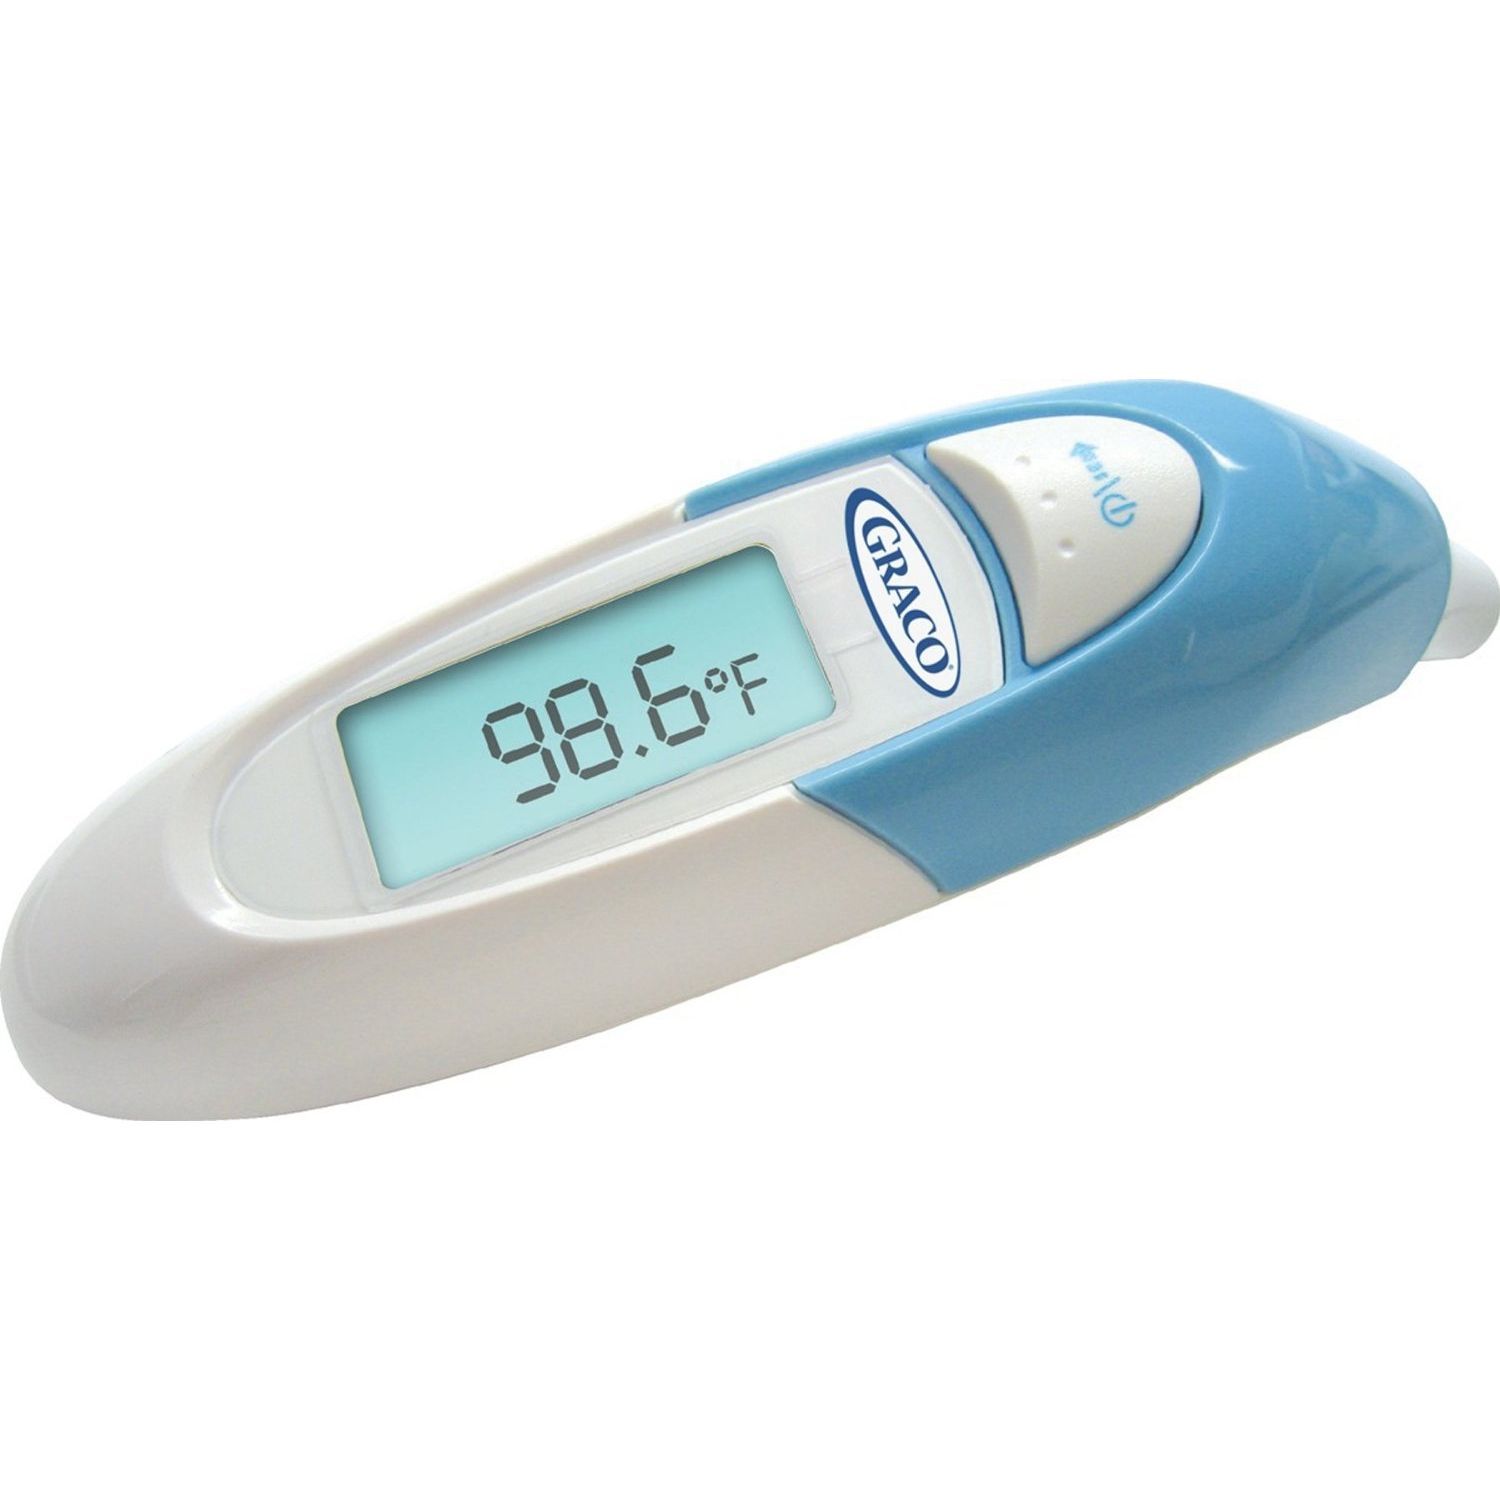 Graco 1 Second Ear Thermometer - image 1 of 1